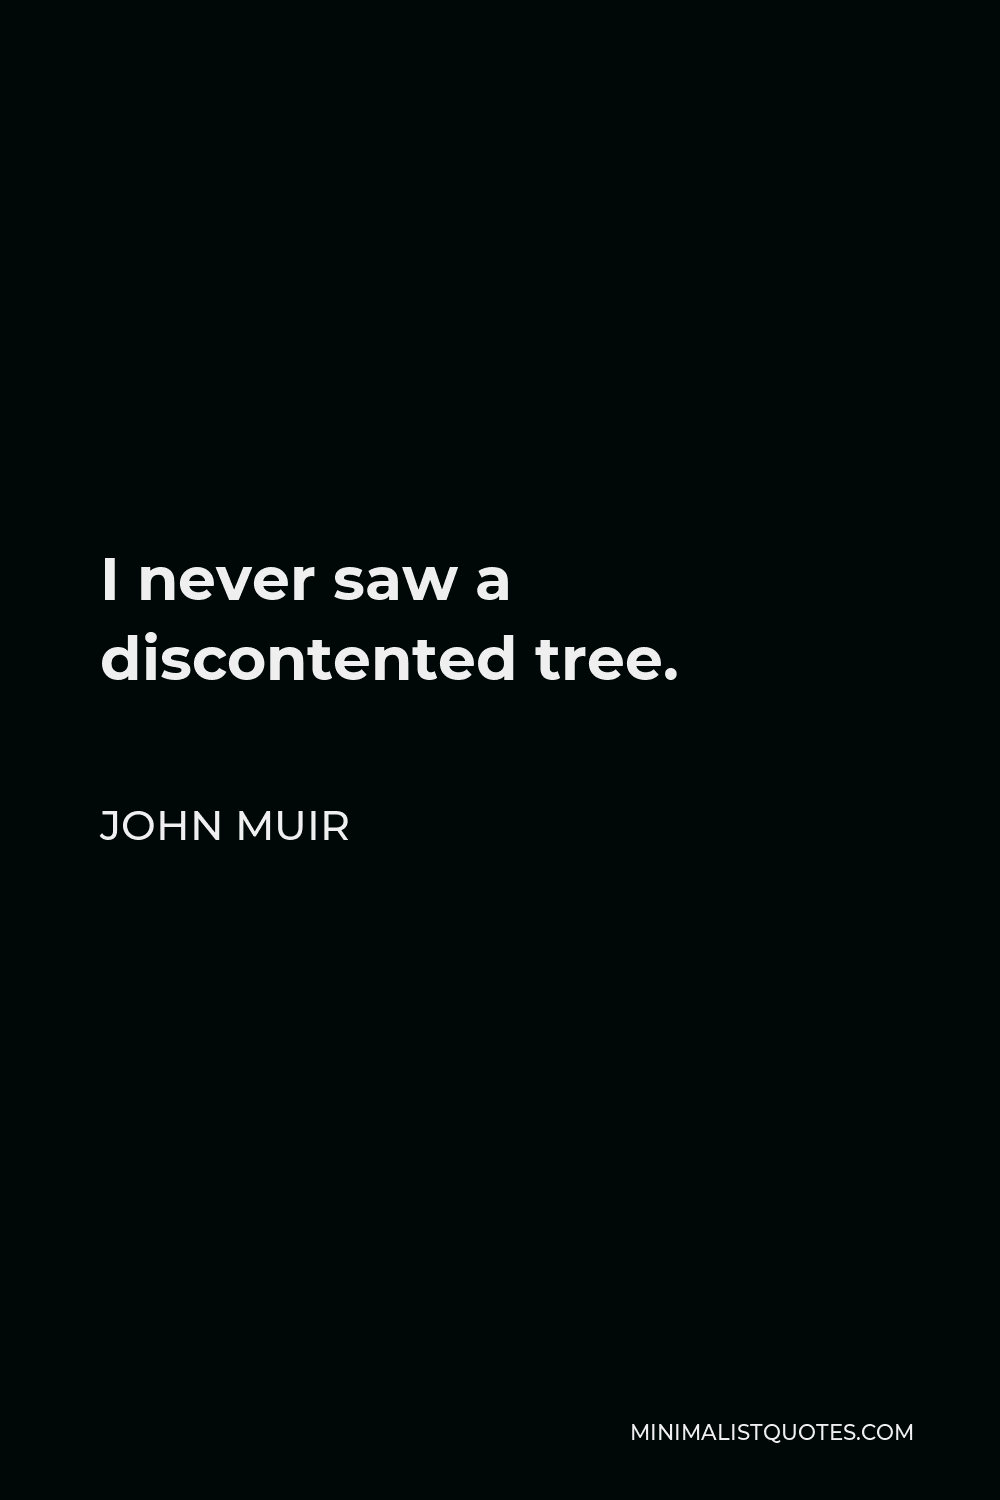 John Muir Quote - I never saw a discontented tree.